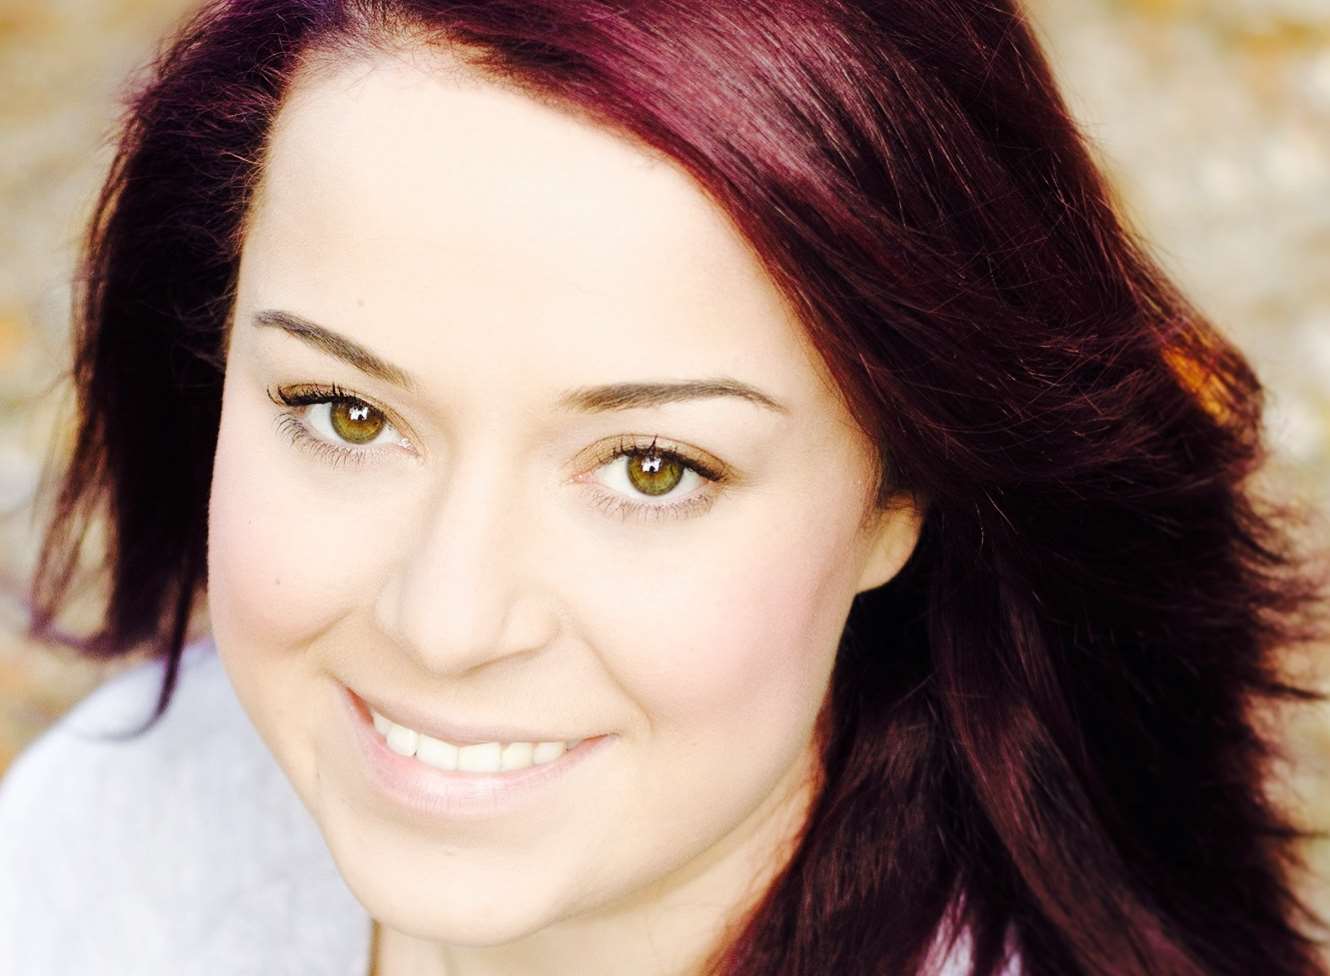 Dani Harmer, will perform at the Assembly Hall Theatre, in Tunbridge Wells